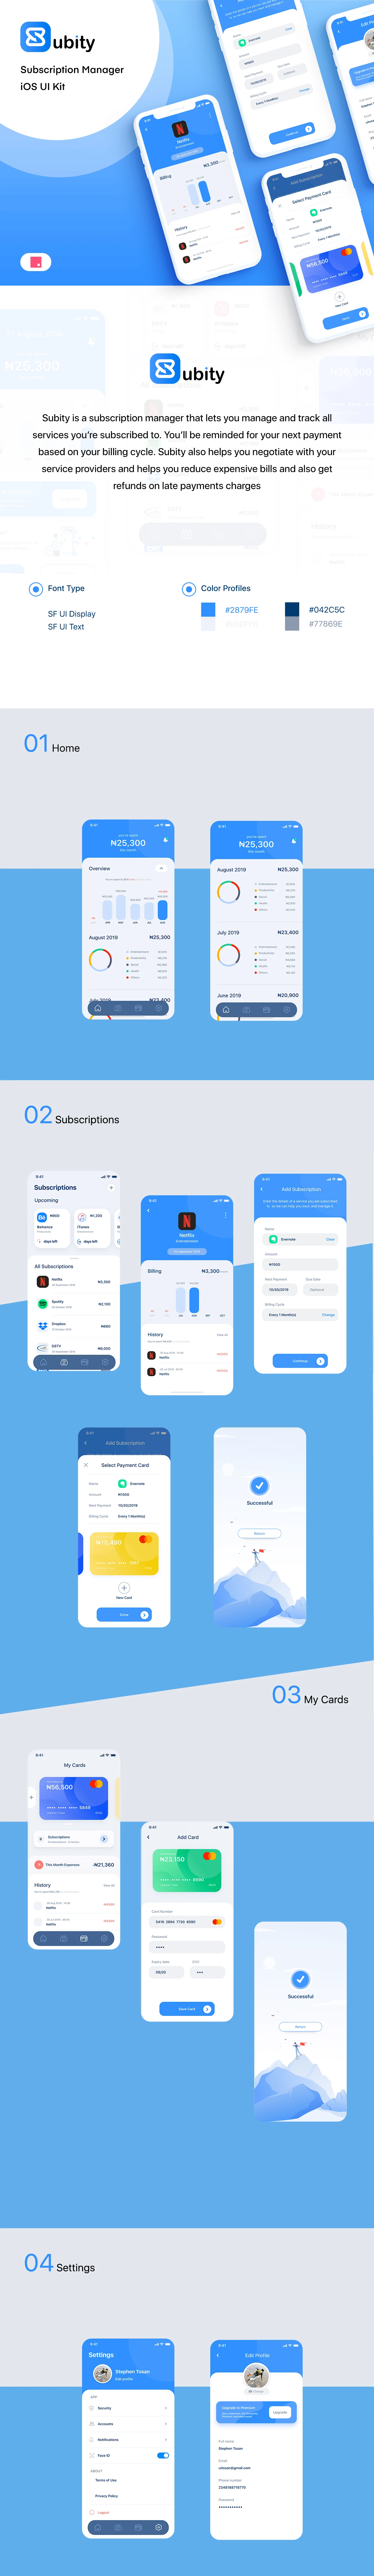 Subity UI Kit - Subscription Manager - Subity is a subscription manager app designed with InVision Studio to help track and manage your subscriptions.